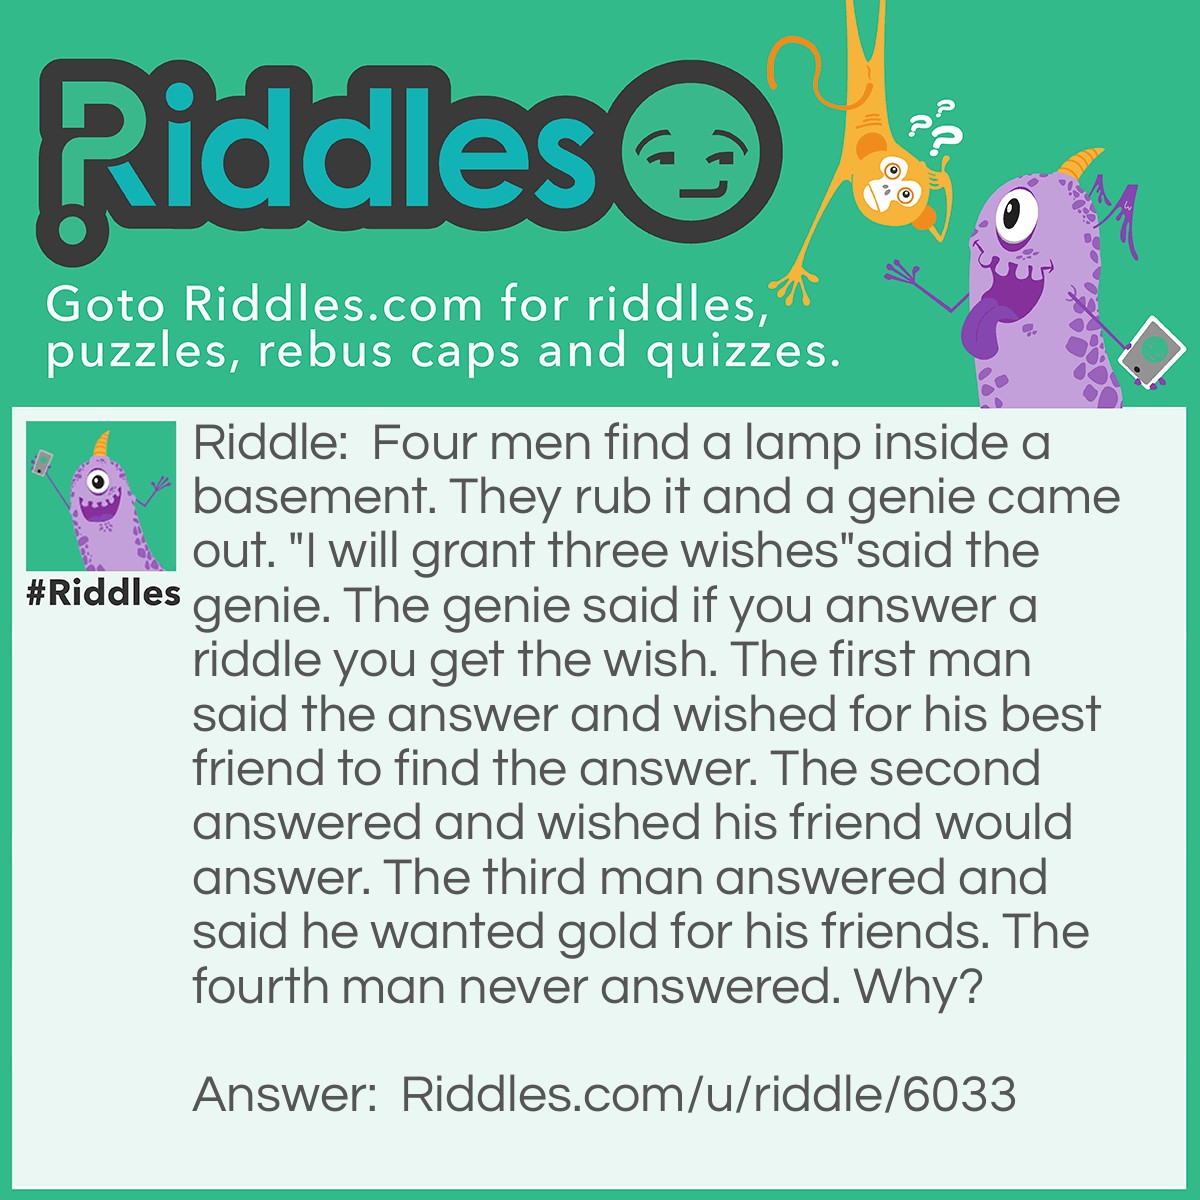 Riddle: Four men find a lamp inside a basement. They rub it and a genie came out. "I will grant three wishes"said the genie. The genie said if you answer a riddle you get the wish. The first man said the answer and wished for his best friend to find the answer. The second answered and wished his friend would answer. The third man answered and said he wanted gold for his friends. The fourth man never answered. Why? Answer: He was deaf. So he didn't even hear the riddle.